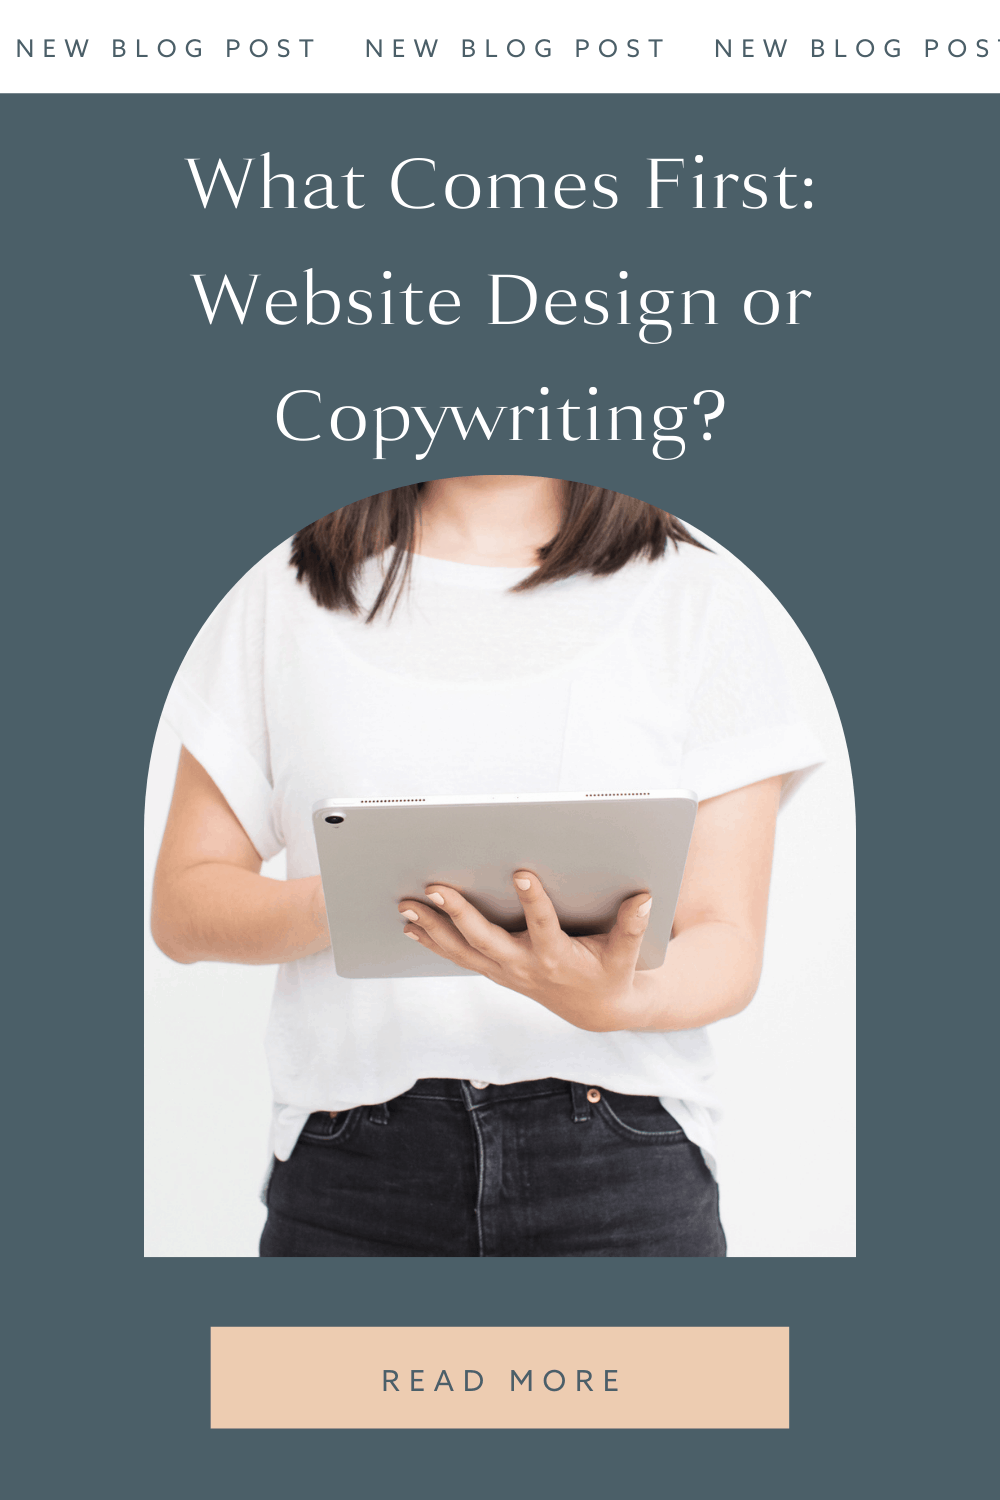 What Comes First: Website Design or Copywriting?